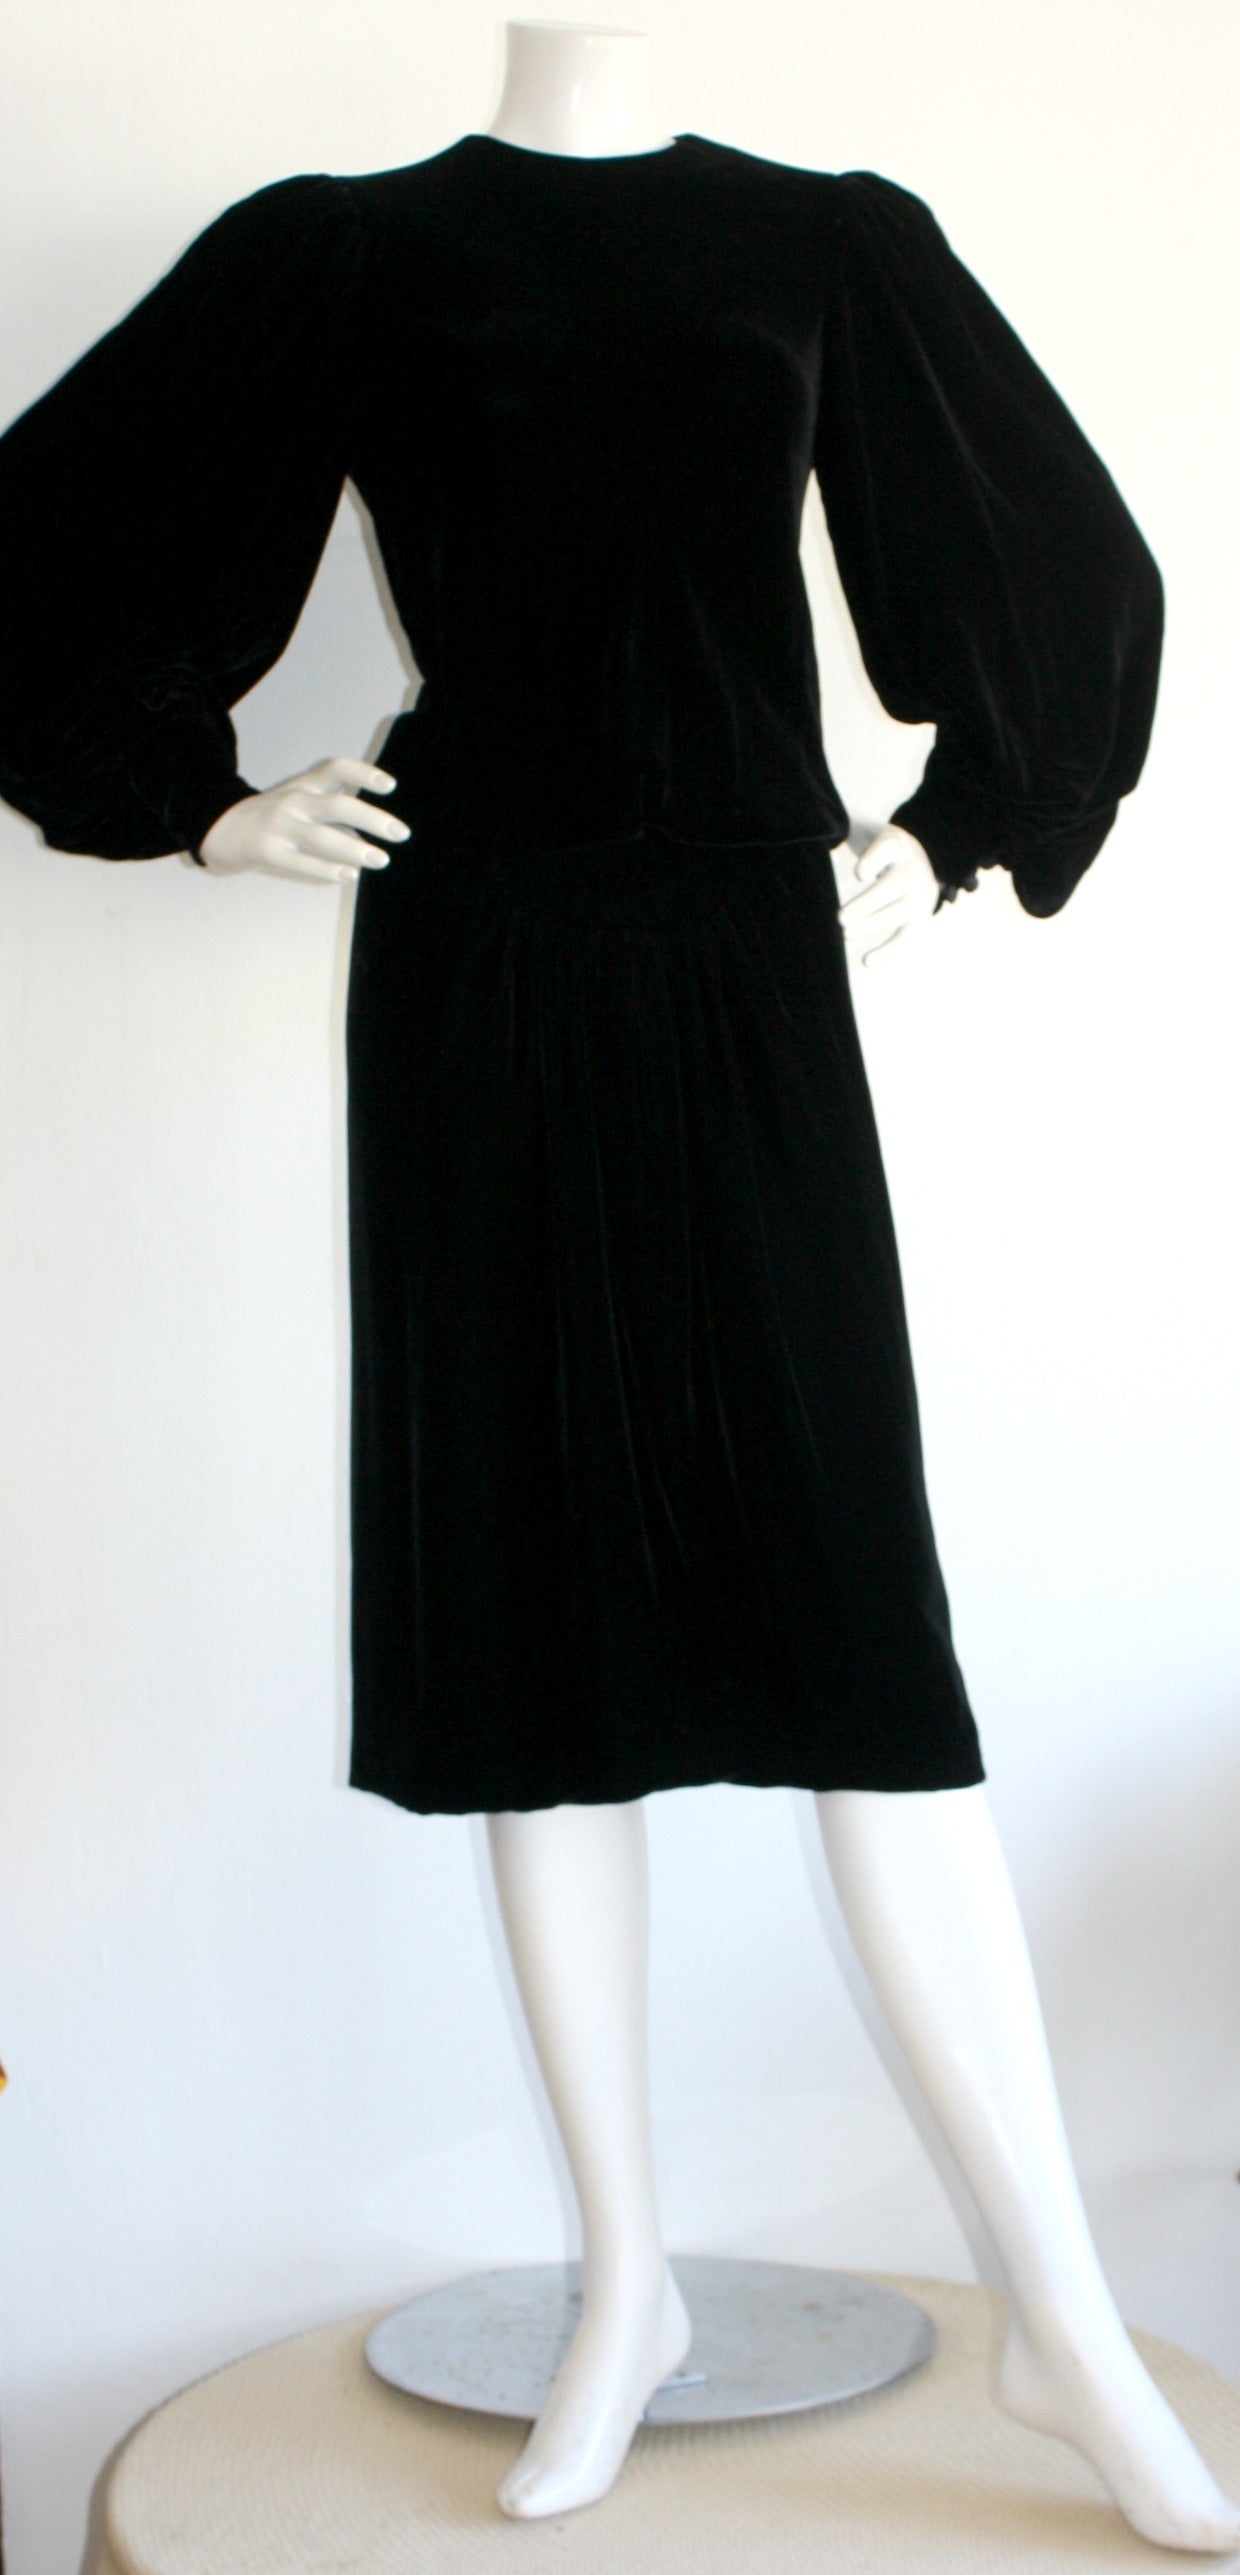 Stunning vintage Oscar de la Renta black silk velvet dress! Chic buttons up the back, with balloon sleeves. This velvet is so soft!!! Darting detail at waist makes for a very flattering fit. Inside support waistband. Perfect dress for a holiday